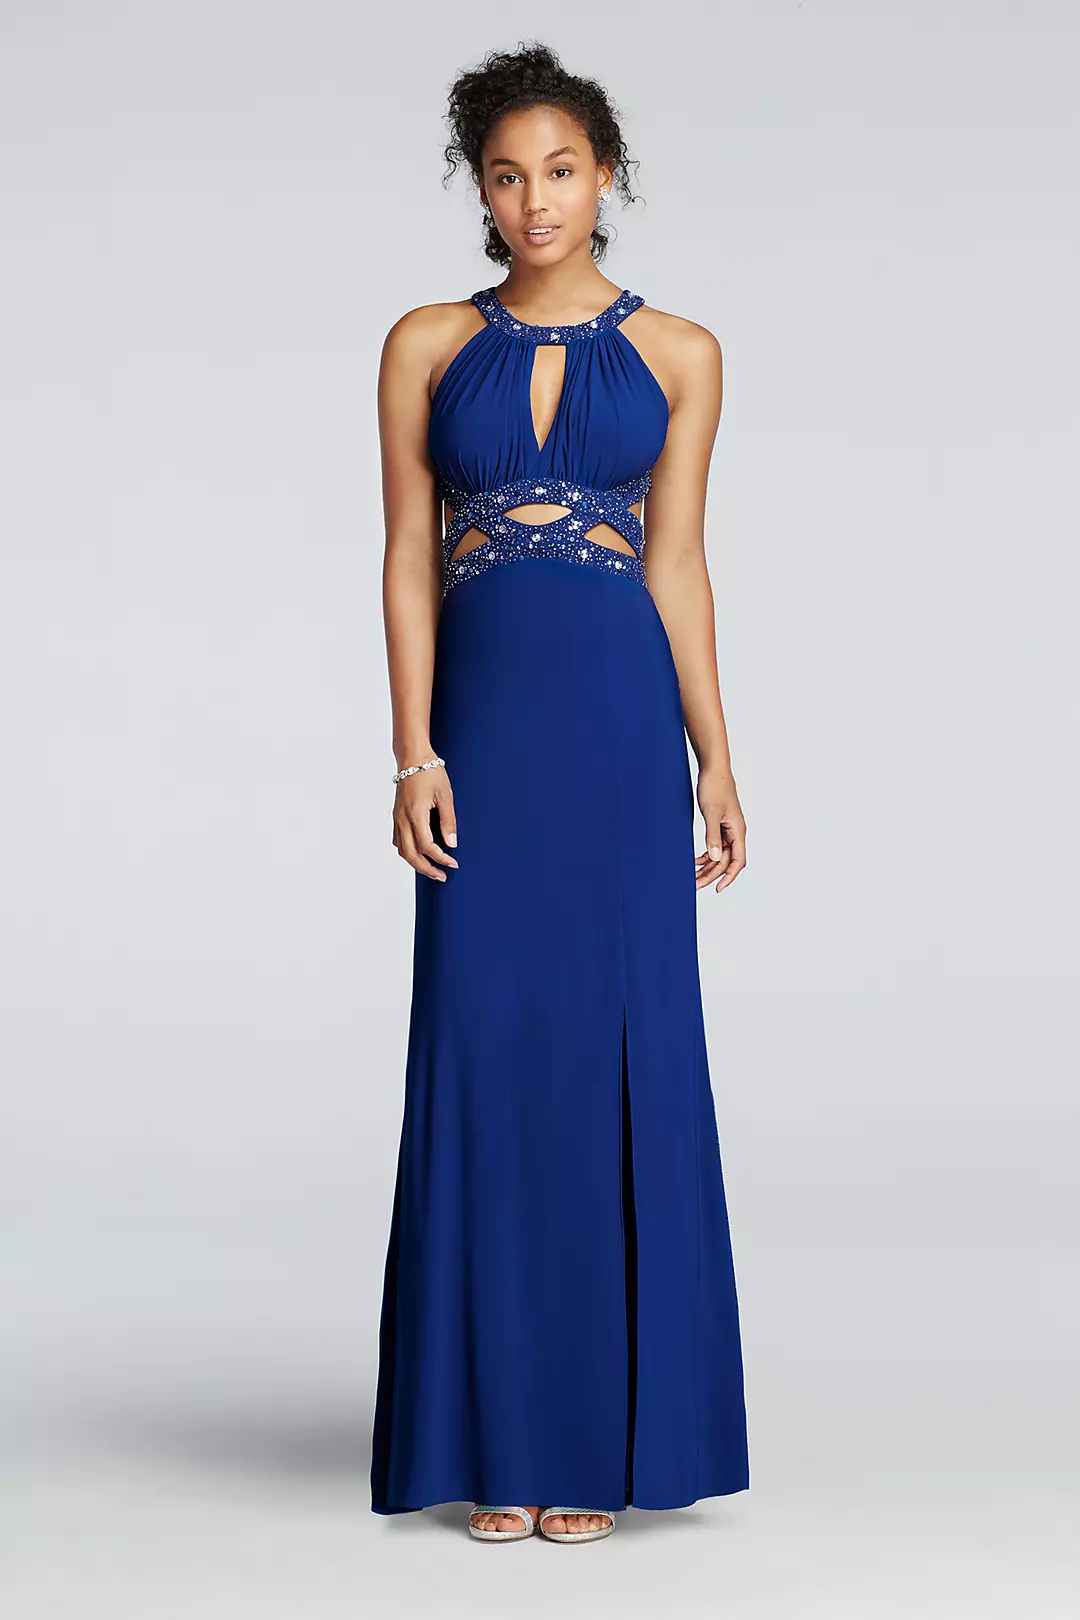 Round Halter Jersey Prom Dress with Cut Out Detail Image